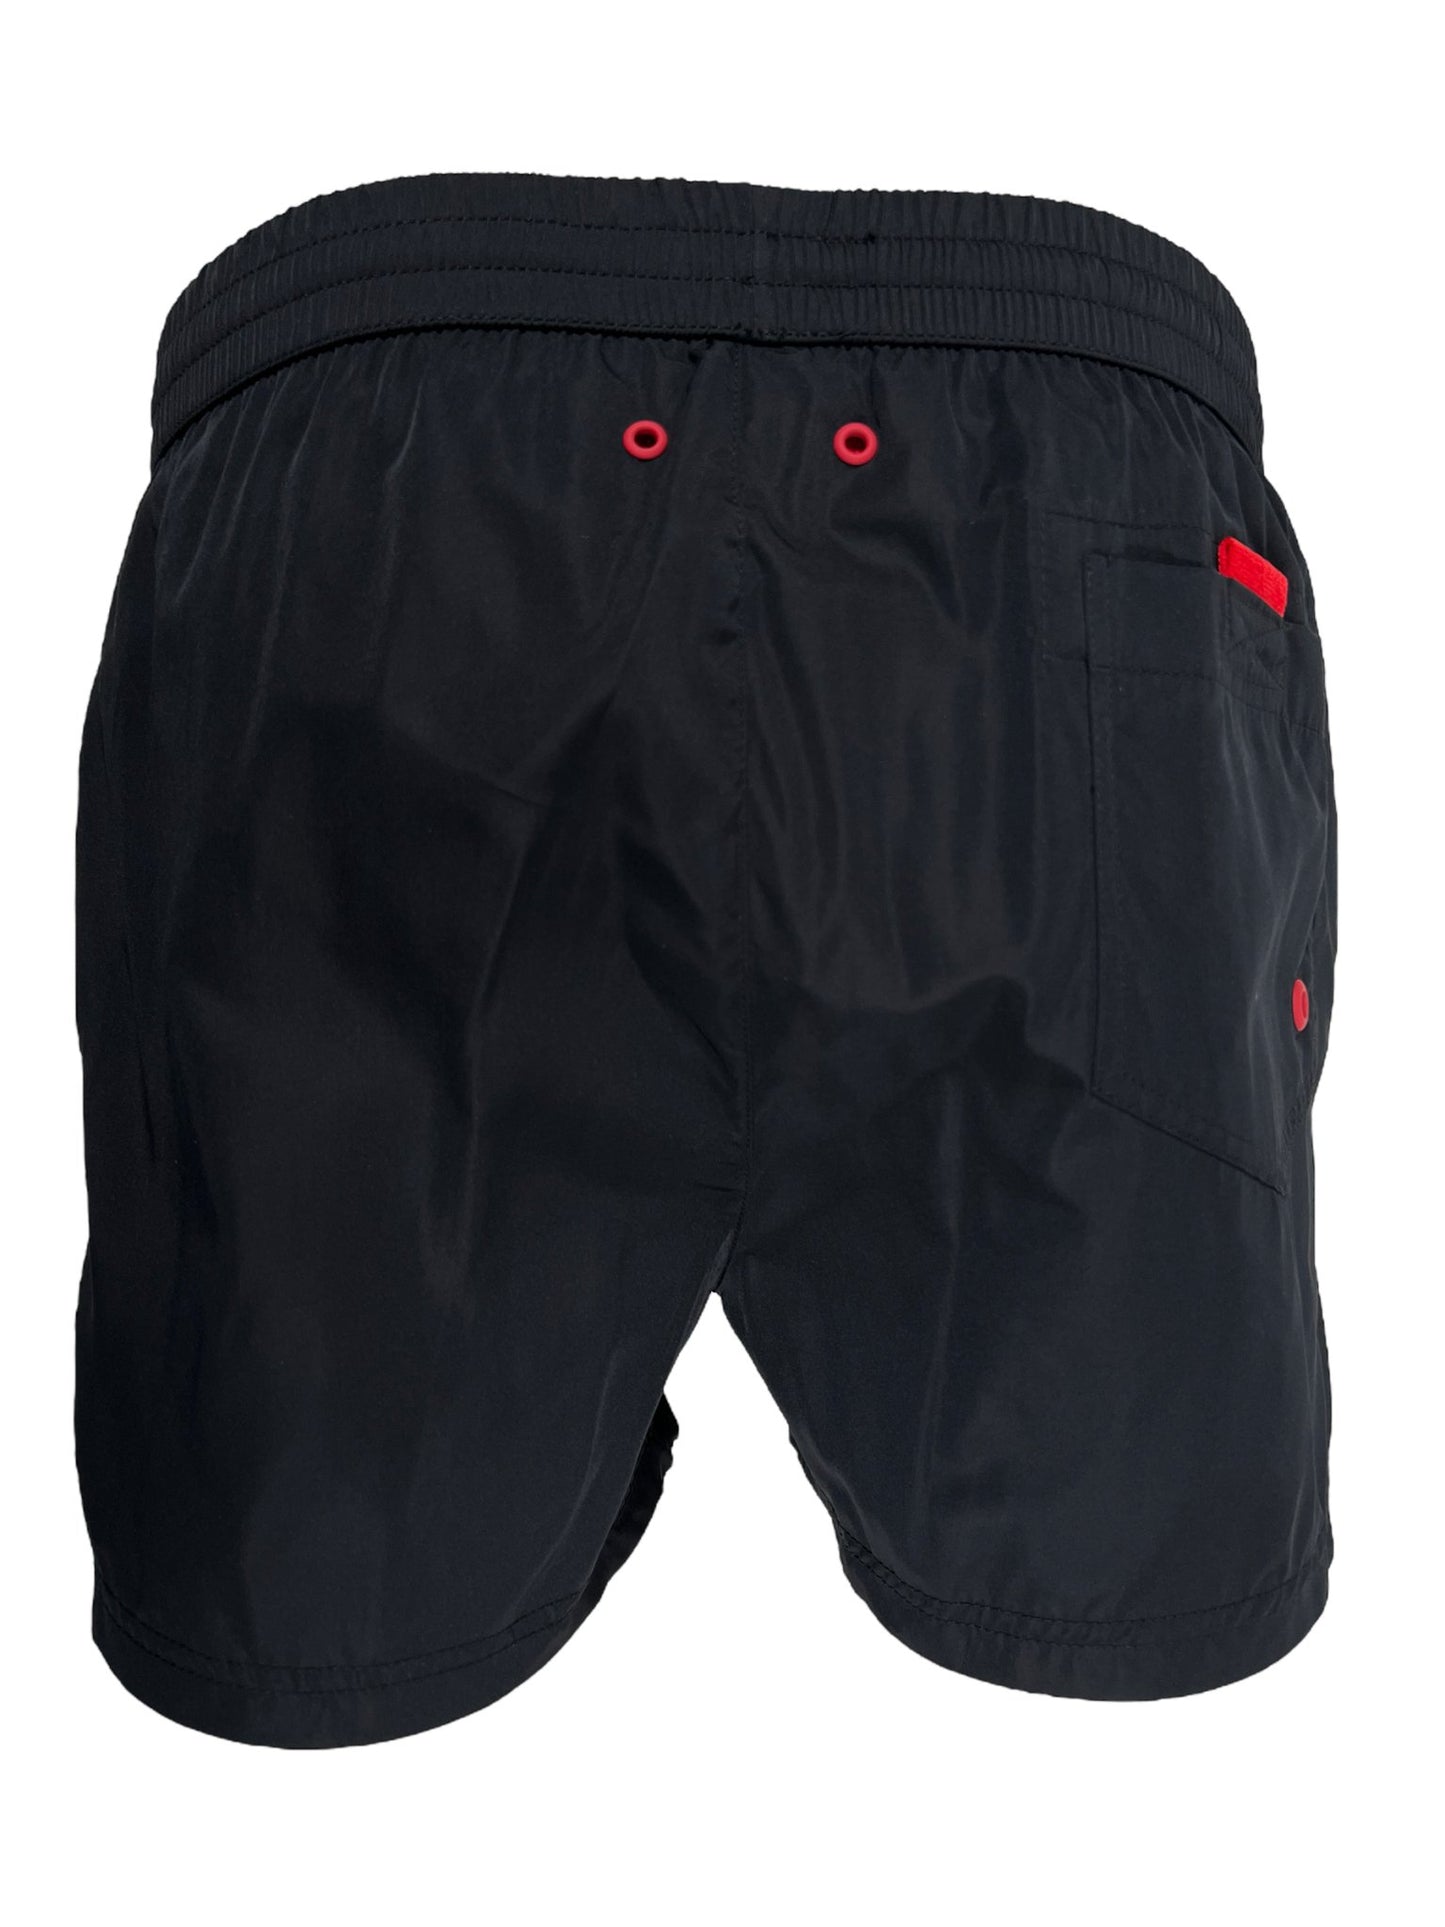 Black DIESEL BMBX-MARIO-34 SHORTS with red button details.